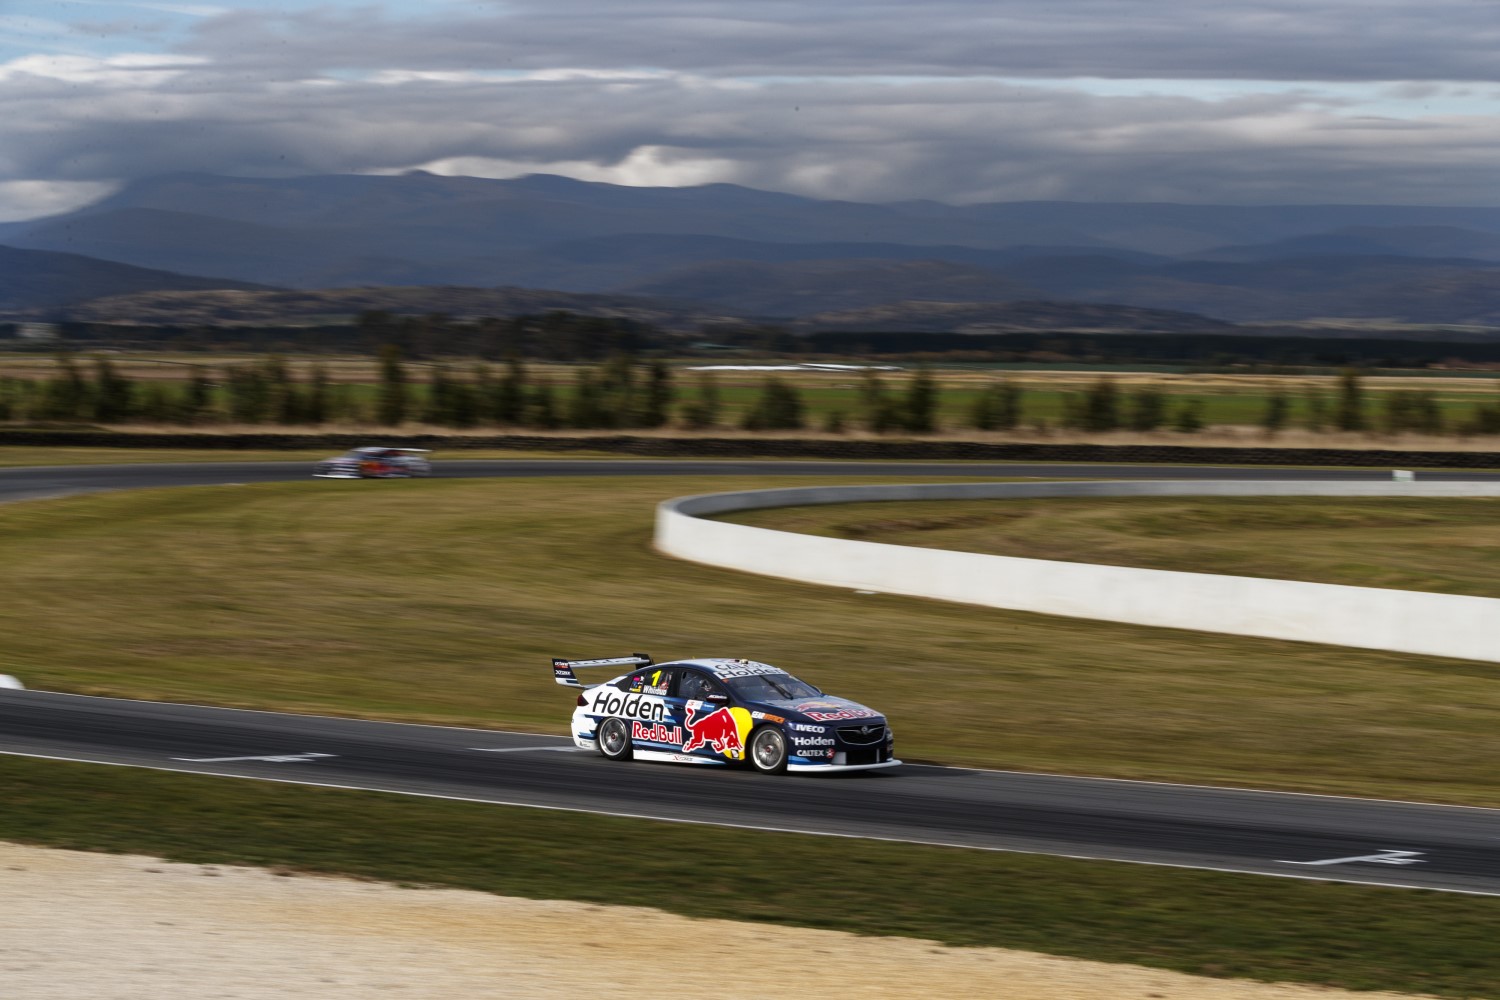 Whincup at speed